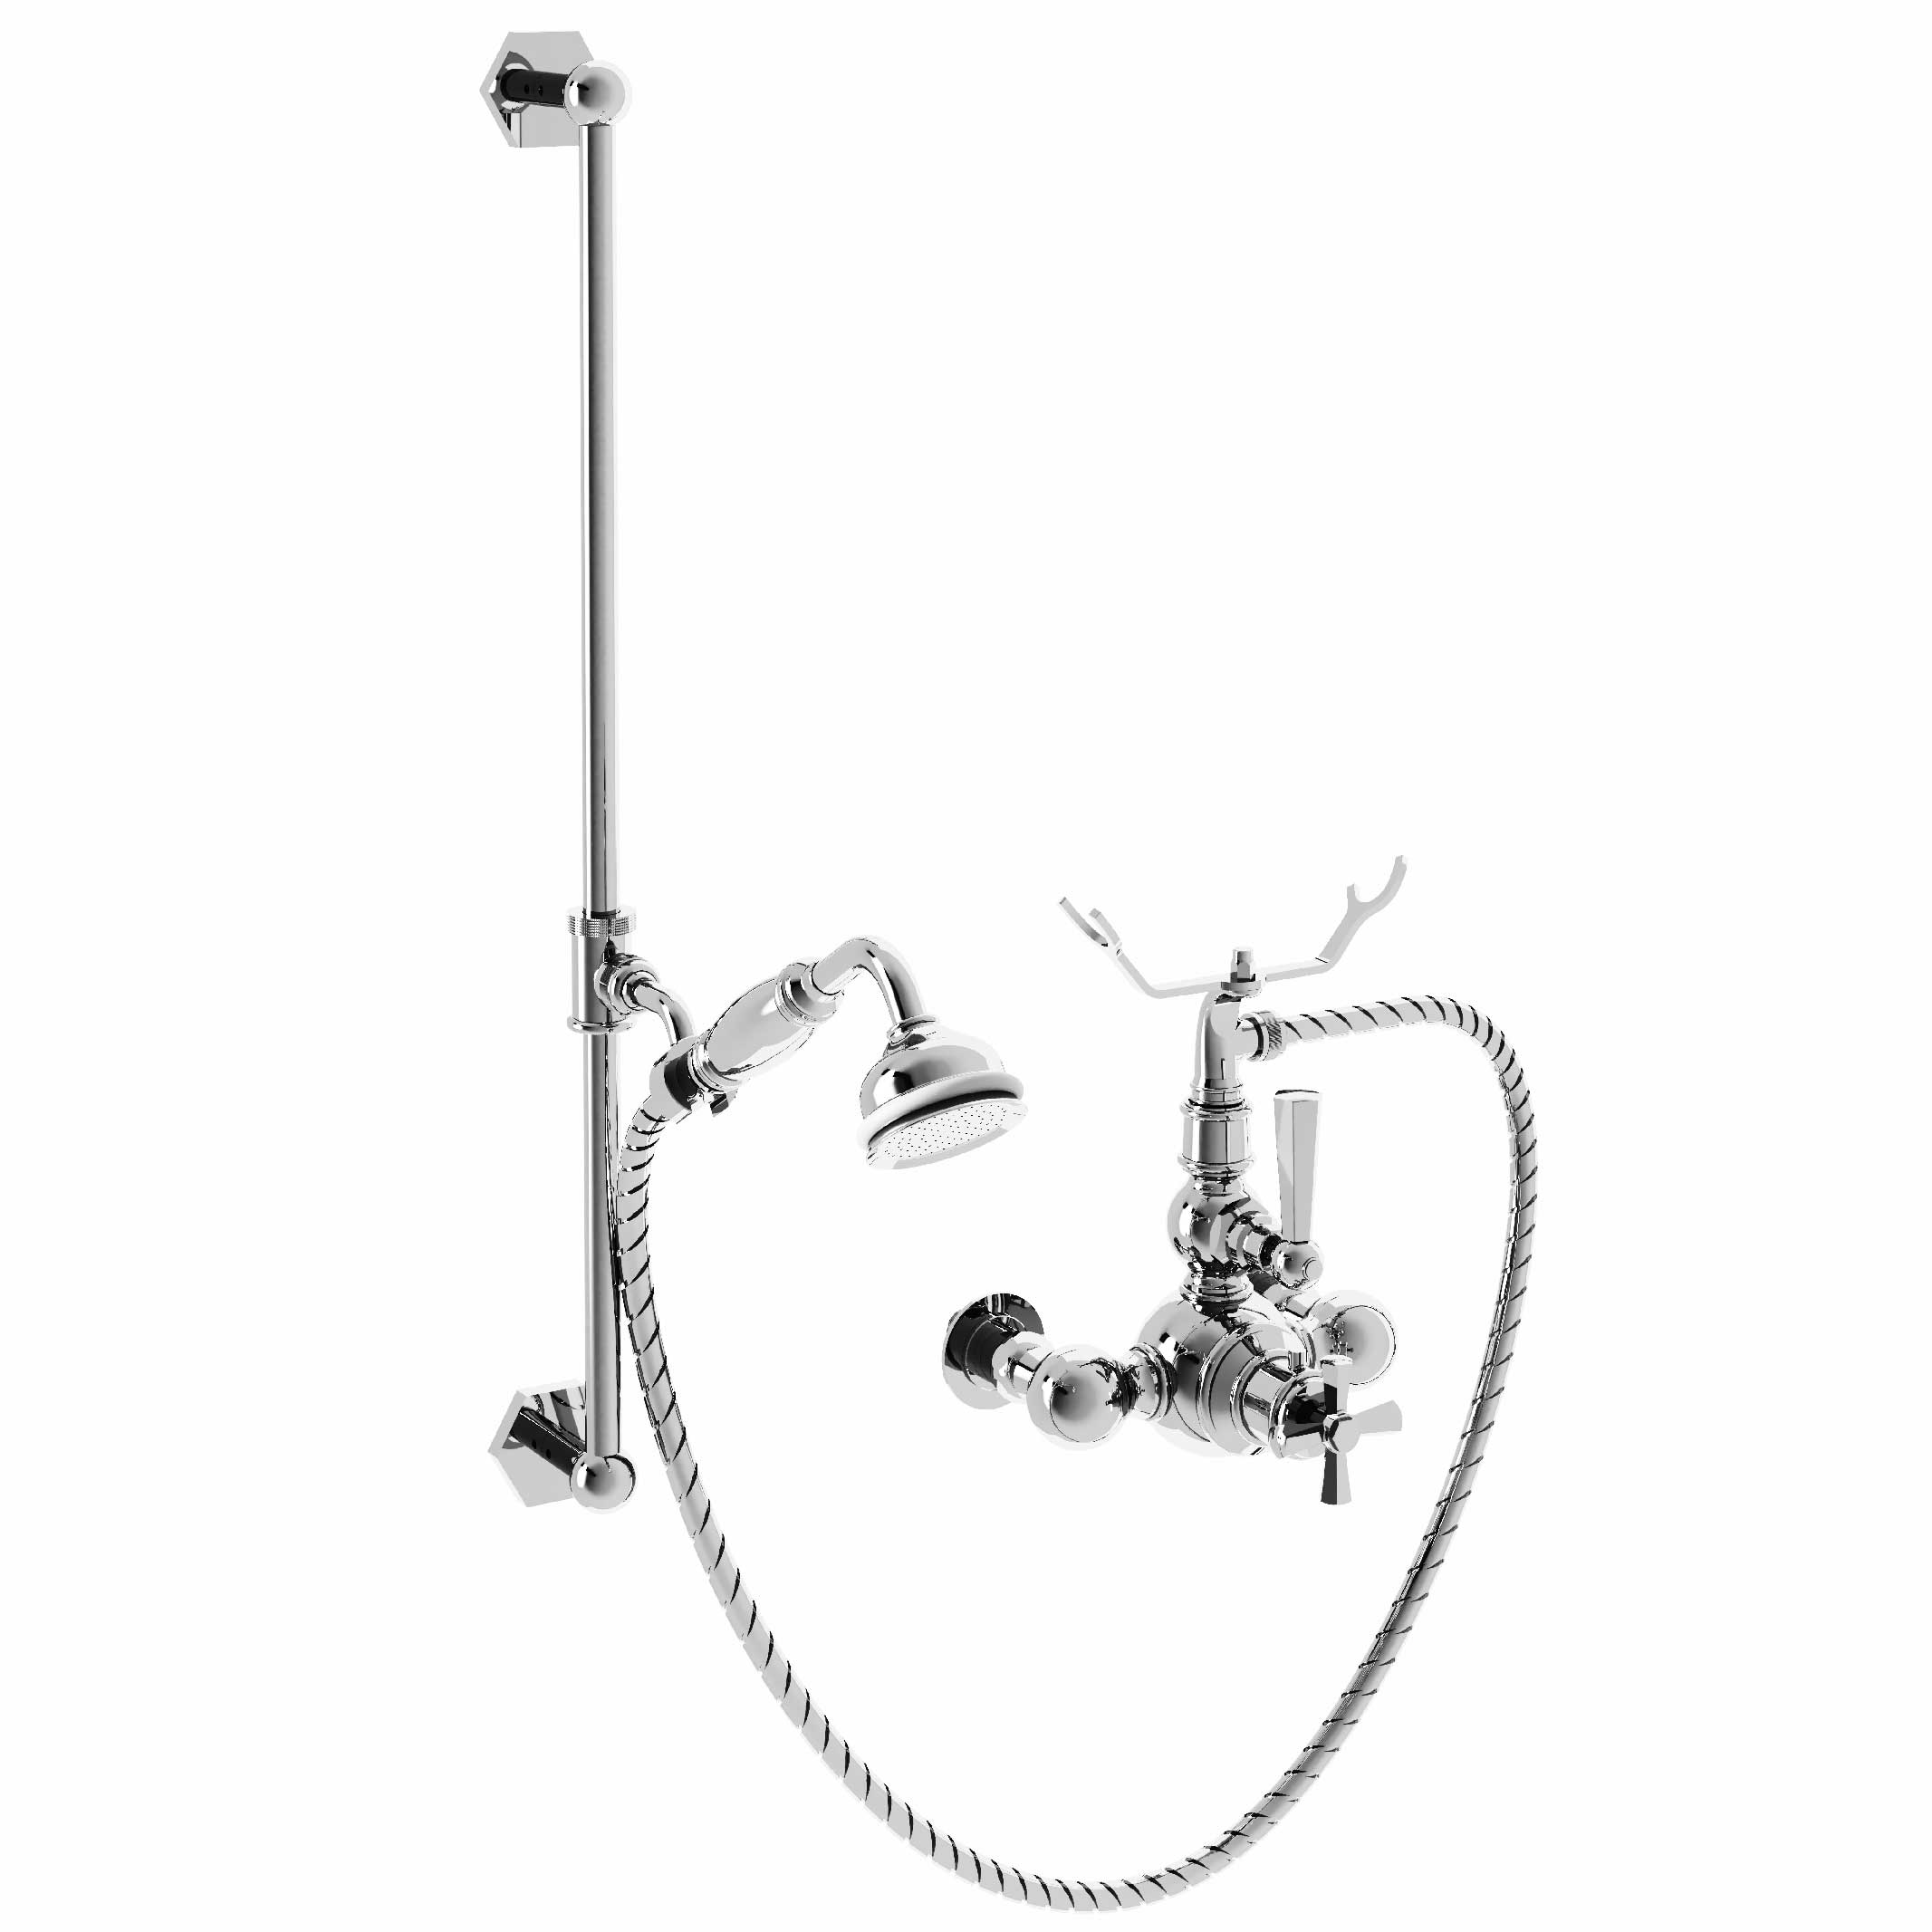 M39-2202T Thermo. shower mixer with sliding bar